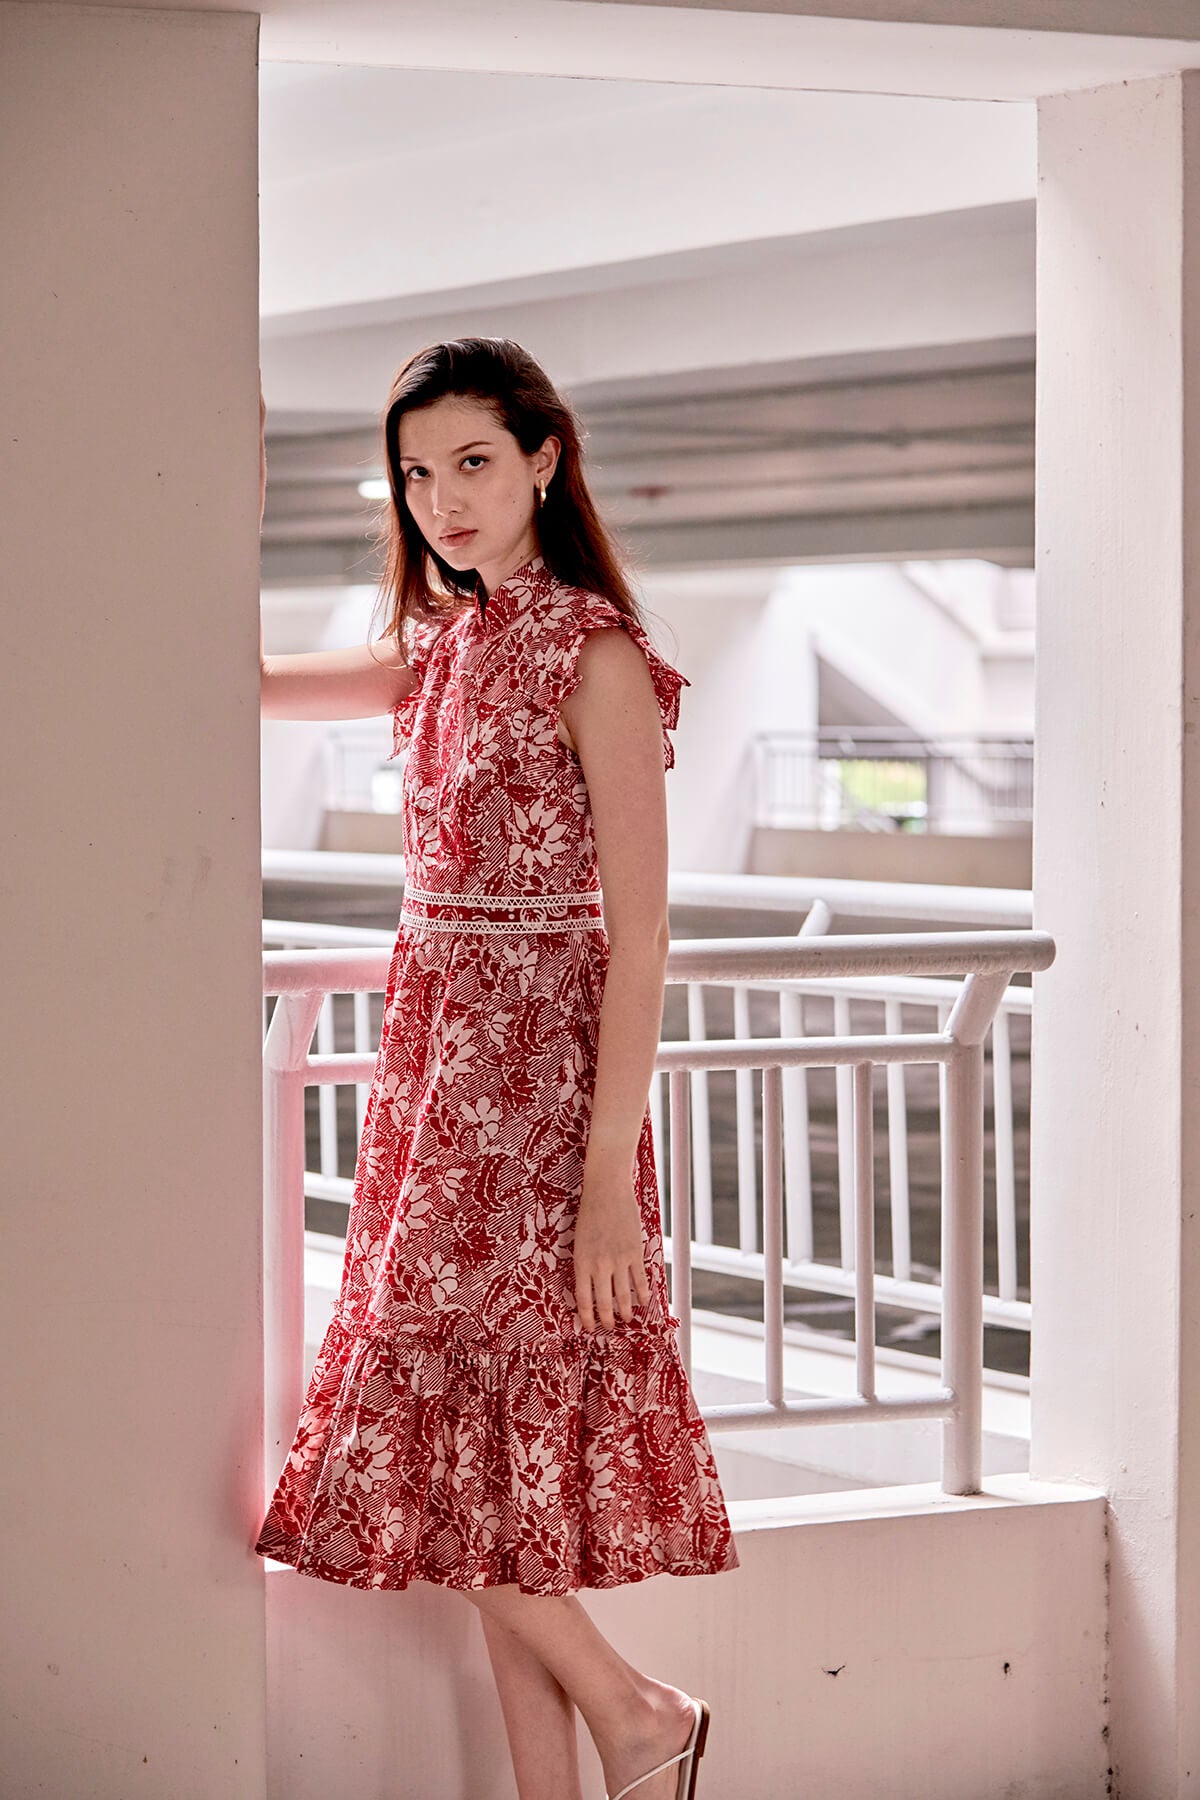 Side profile of Eurasian model, she is modelling a Dayglow red and white batik qipao dress. The dress is over her knee and has a frilly hem and laced trimmed waist band.